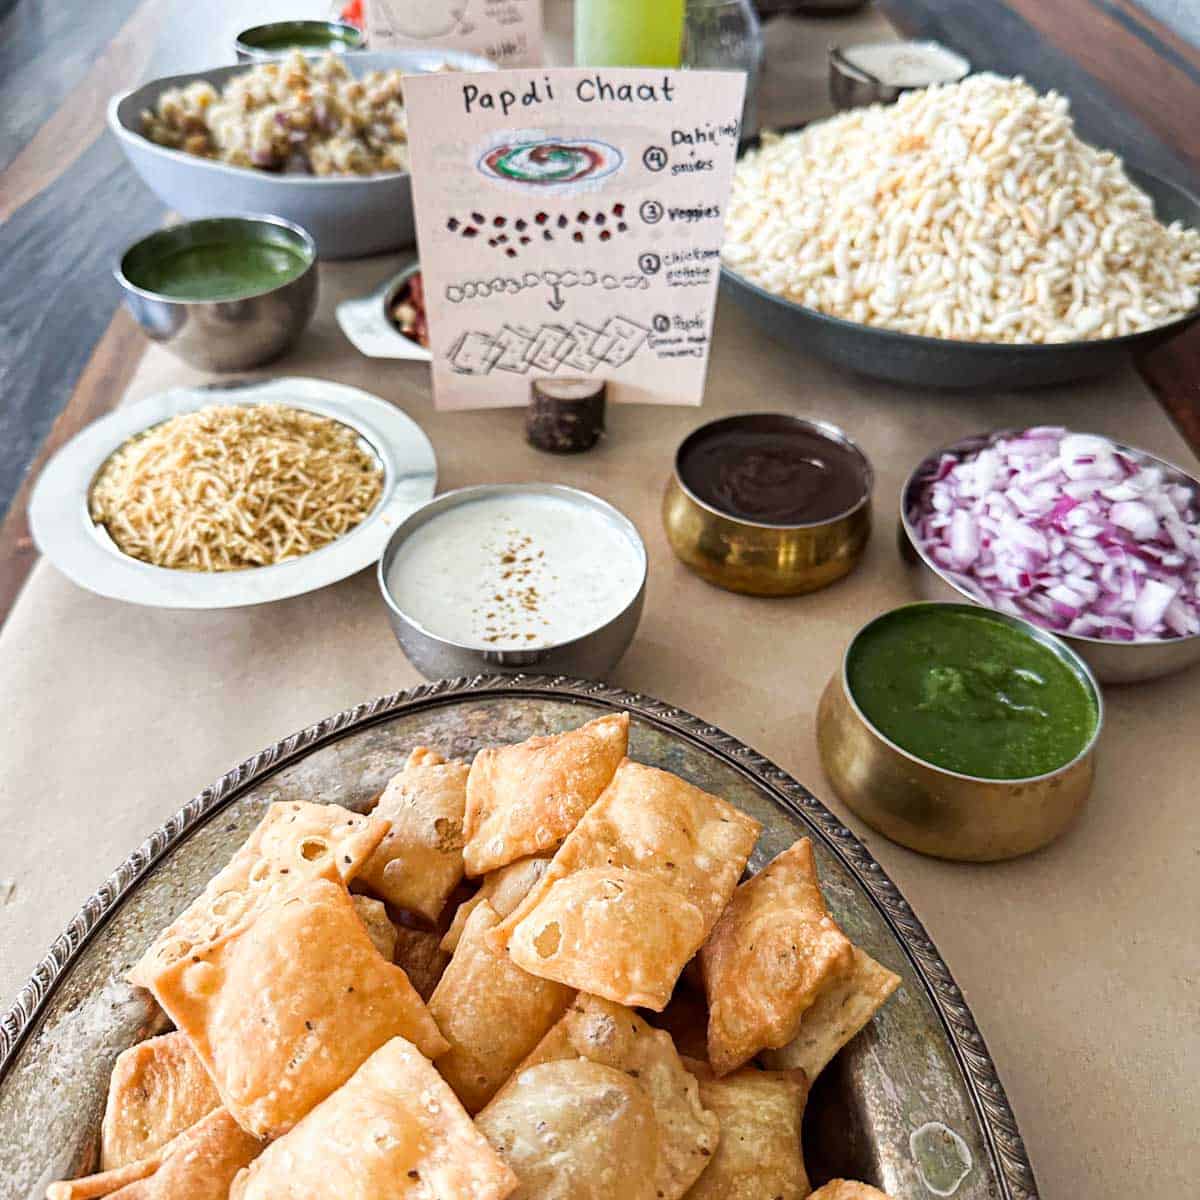 Table setup for chaat party. Table has chaat components like papdi crackers, chutneys, and decor for chaat party.